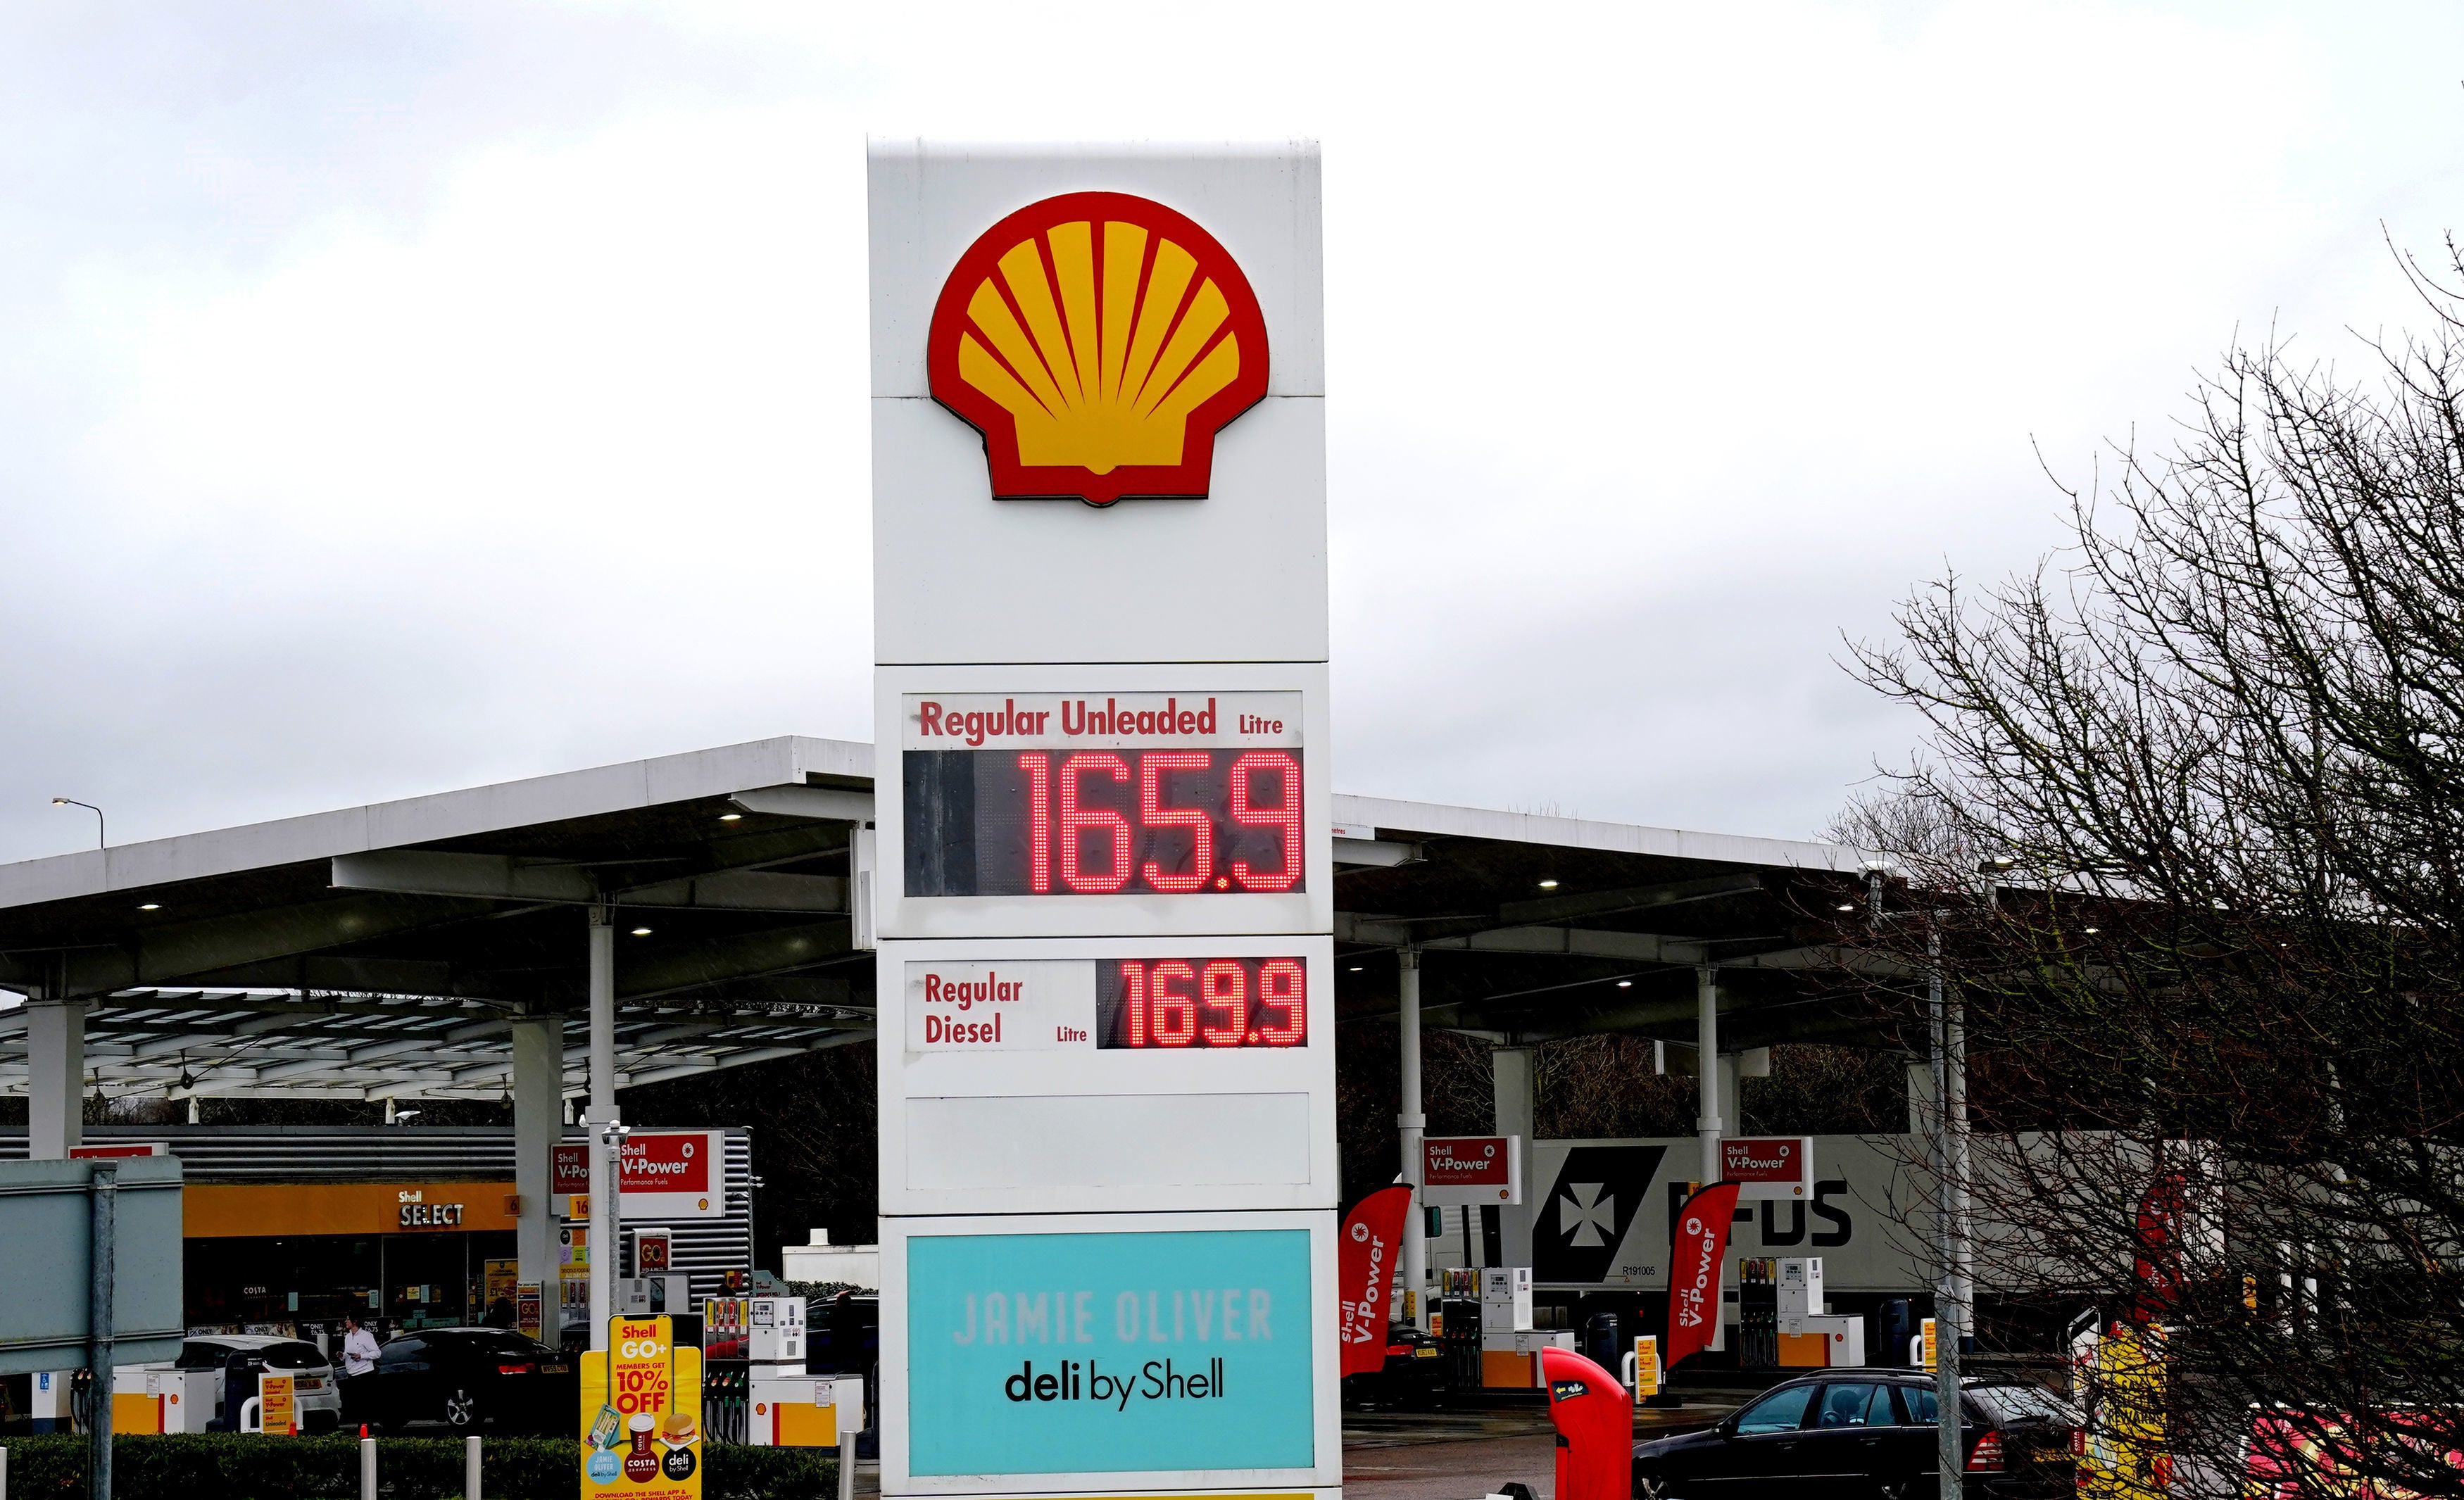 A spokesperson for Shell said the business aims to halve emissions from its global operations by 2030, and to provide more low-carbon energy for customers.